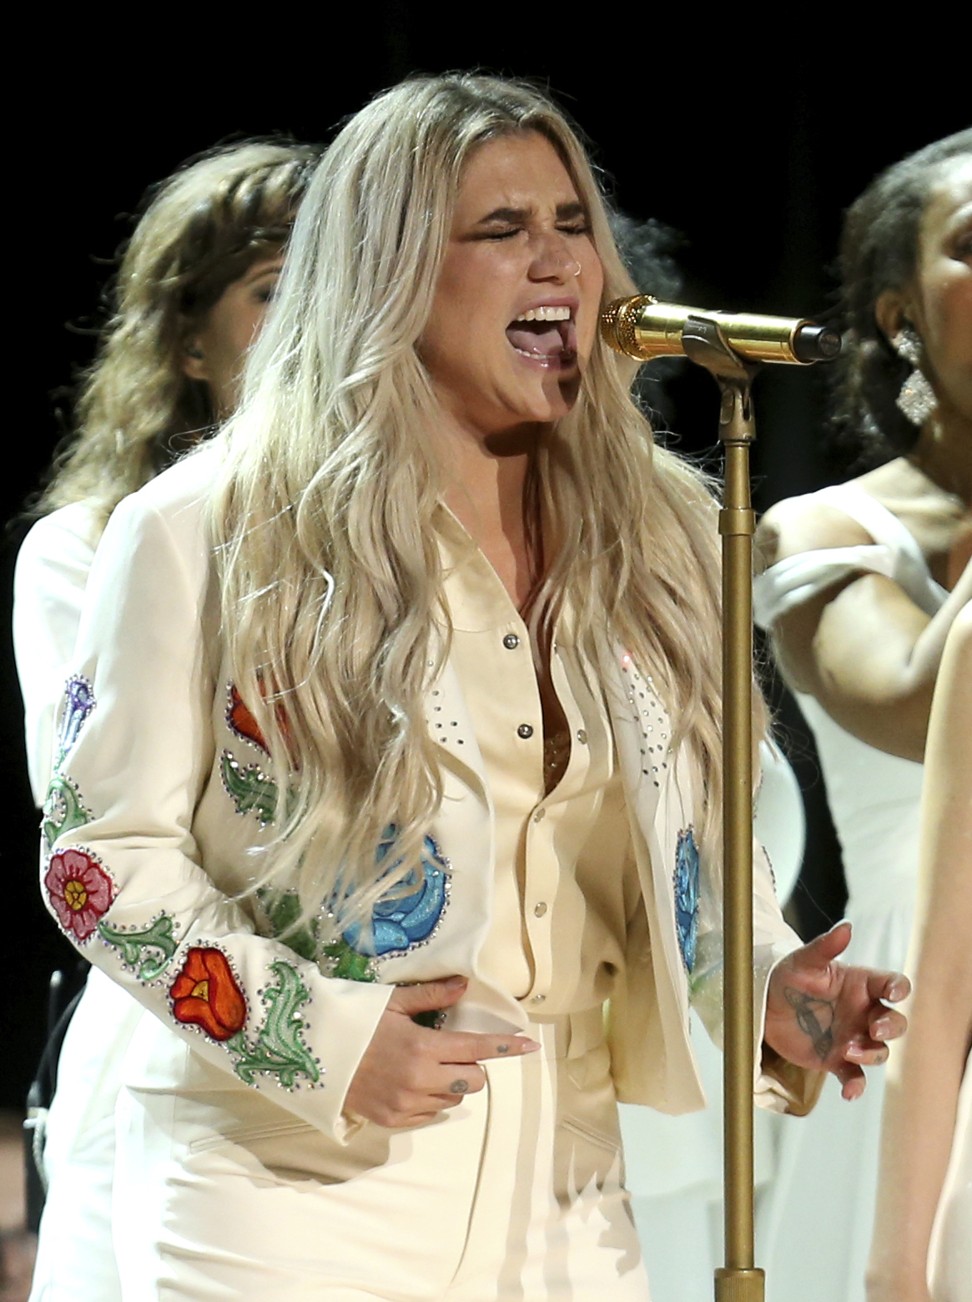 Kesha performs ‘Praying’ at the Grammy Awards ceremony in New York on Sunday. Photo: AP